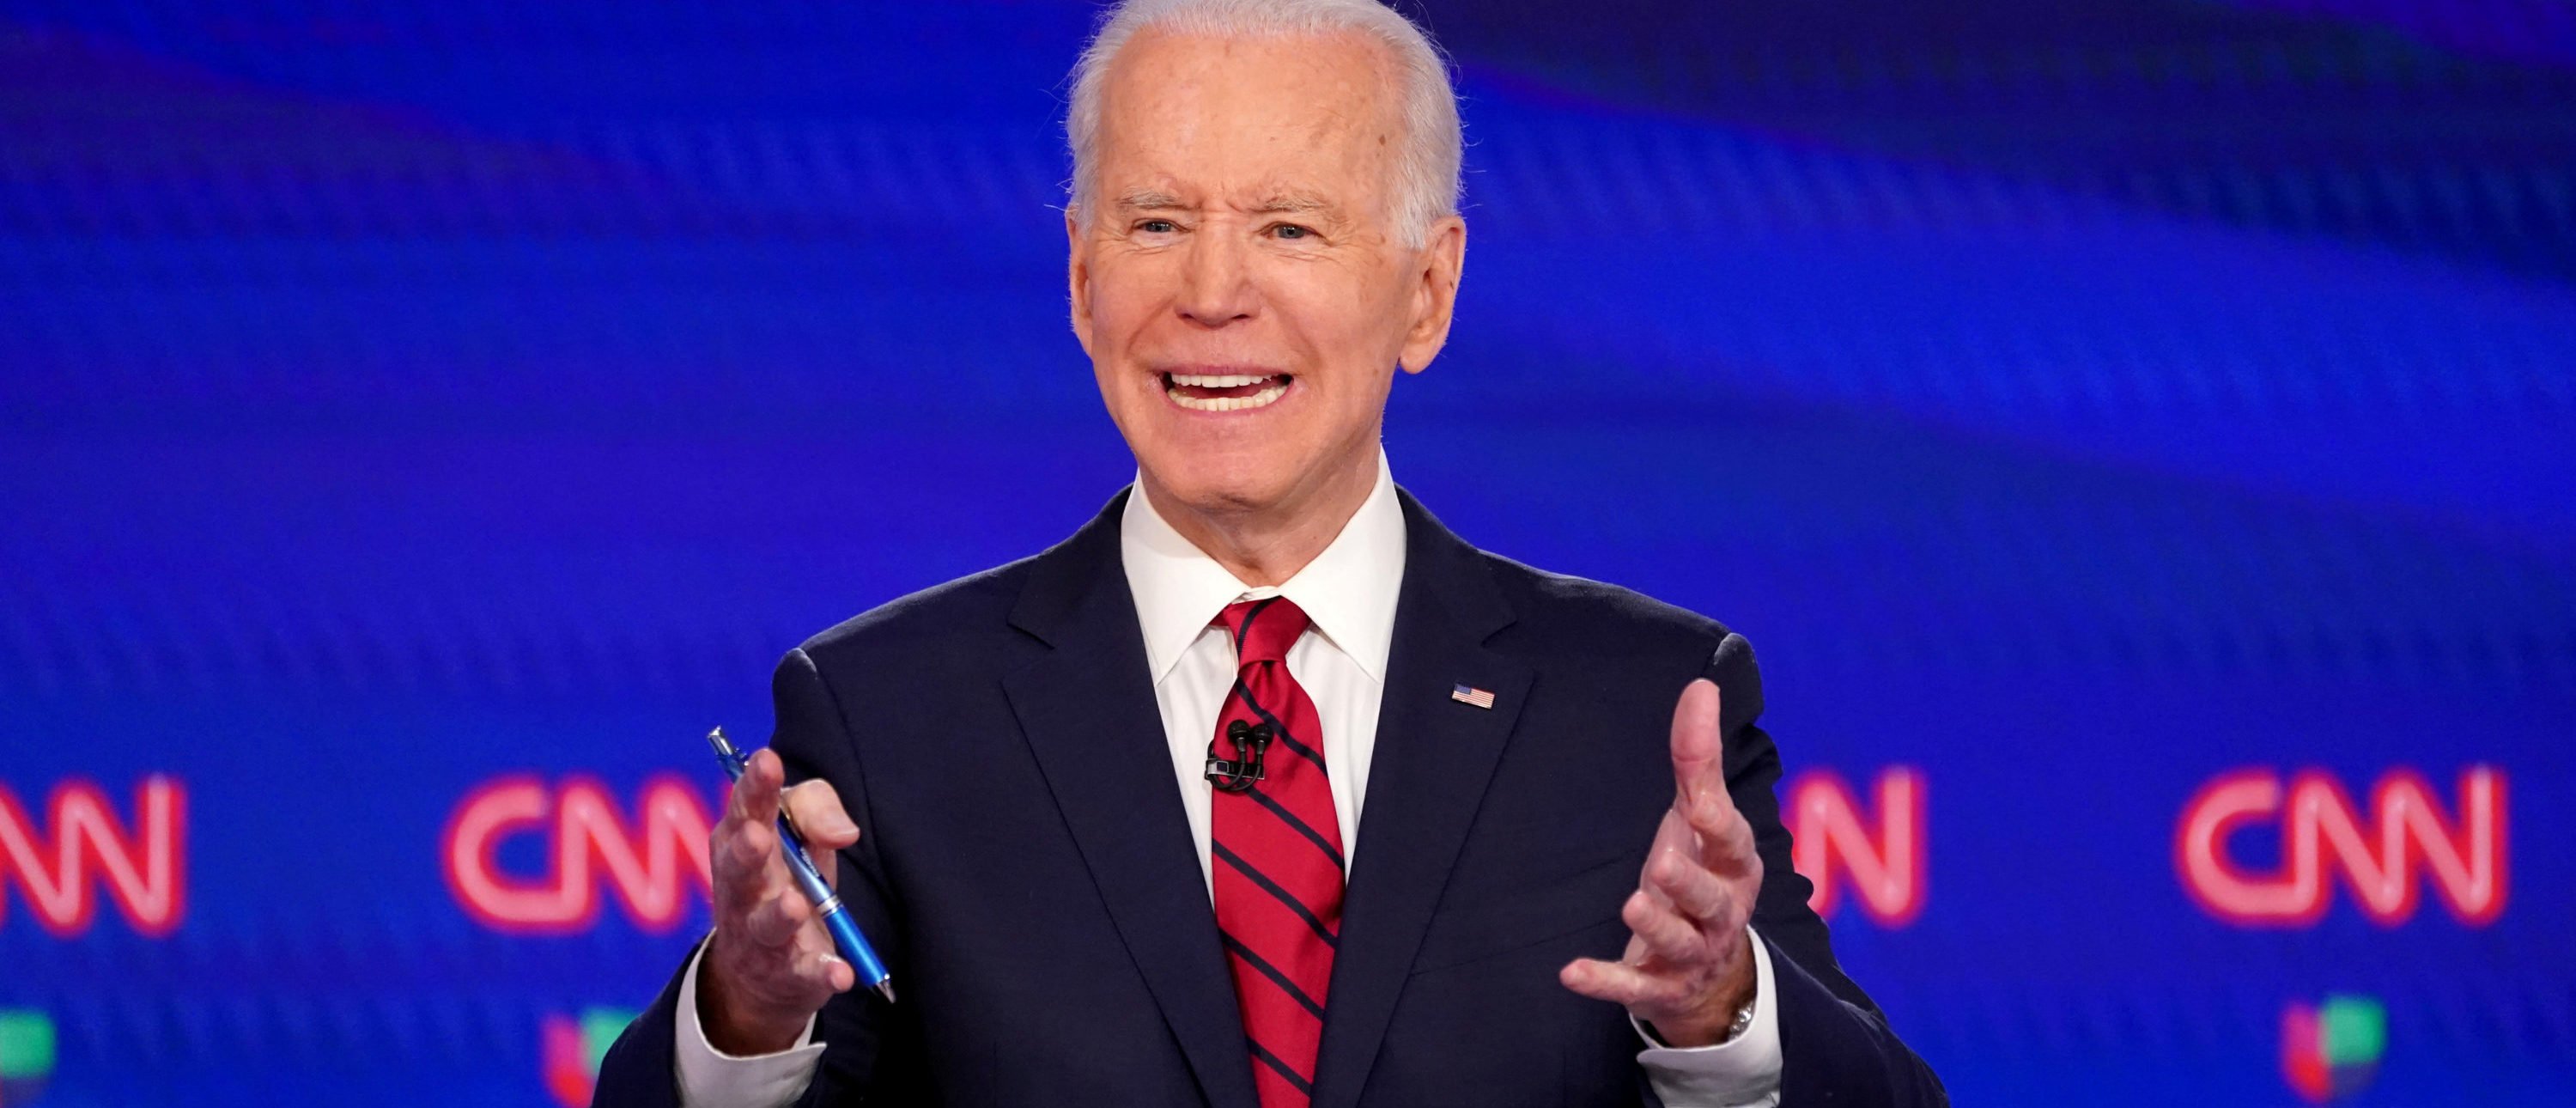 FILE PHOTO: Democratic U.S. presidential candidate and former Vice President Joe Biden speaks during the 11th Democratic candidates debate of the 2020 U.S. presidential campaign, held in CNN's Washington studios without an audience because of the global coronavirus pandemic, in Washington, U.S., March 15, 2020. REUTERS/Kevin Lamarque/File Photo 